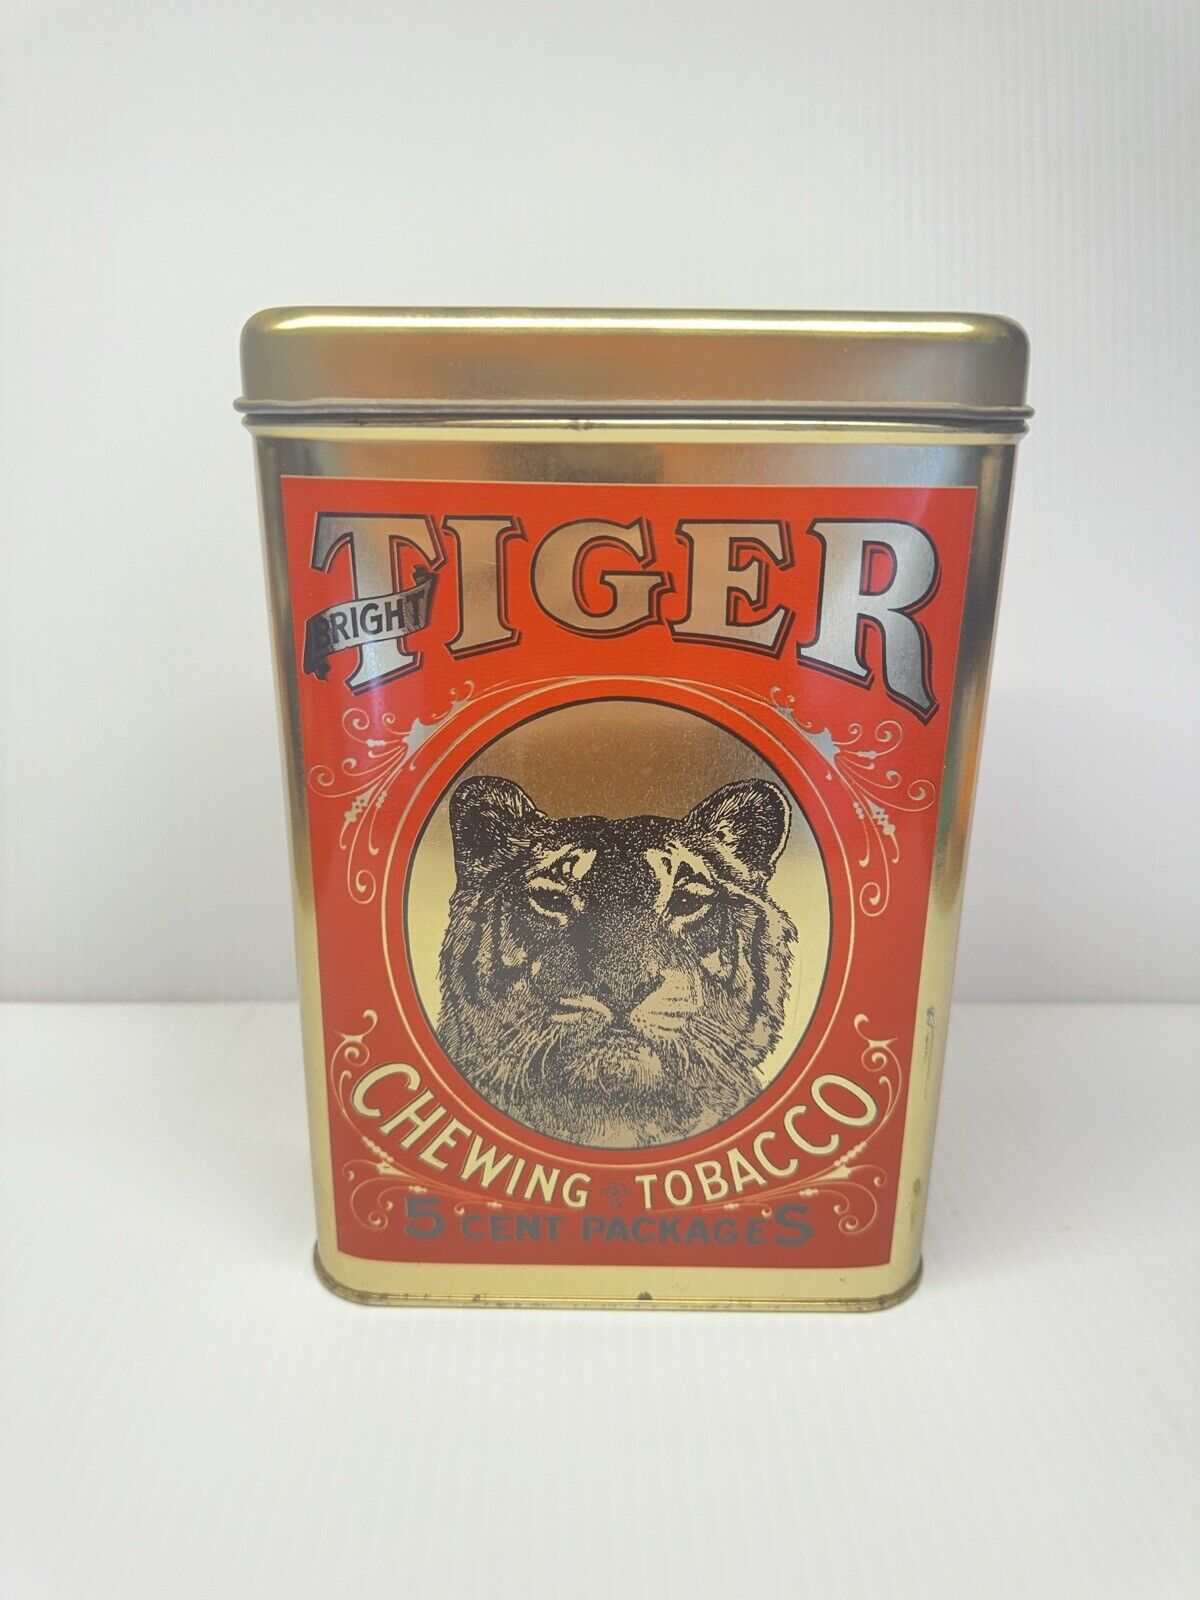 Large Vintage Bright Tiger 5 Cent Fine Cut Chewing Tobacco Tin